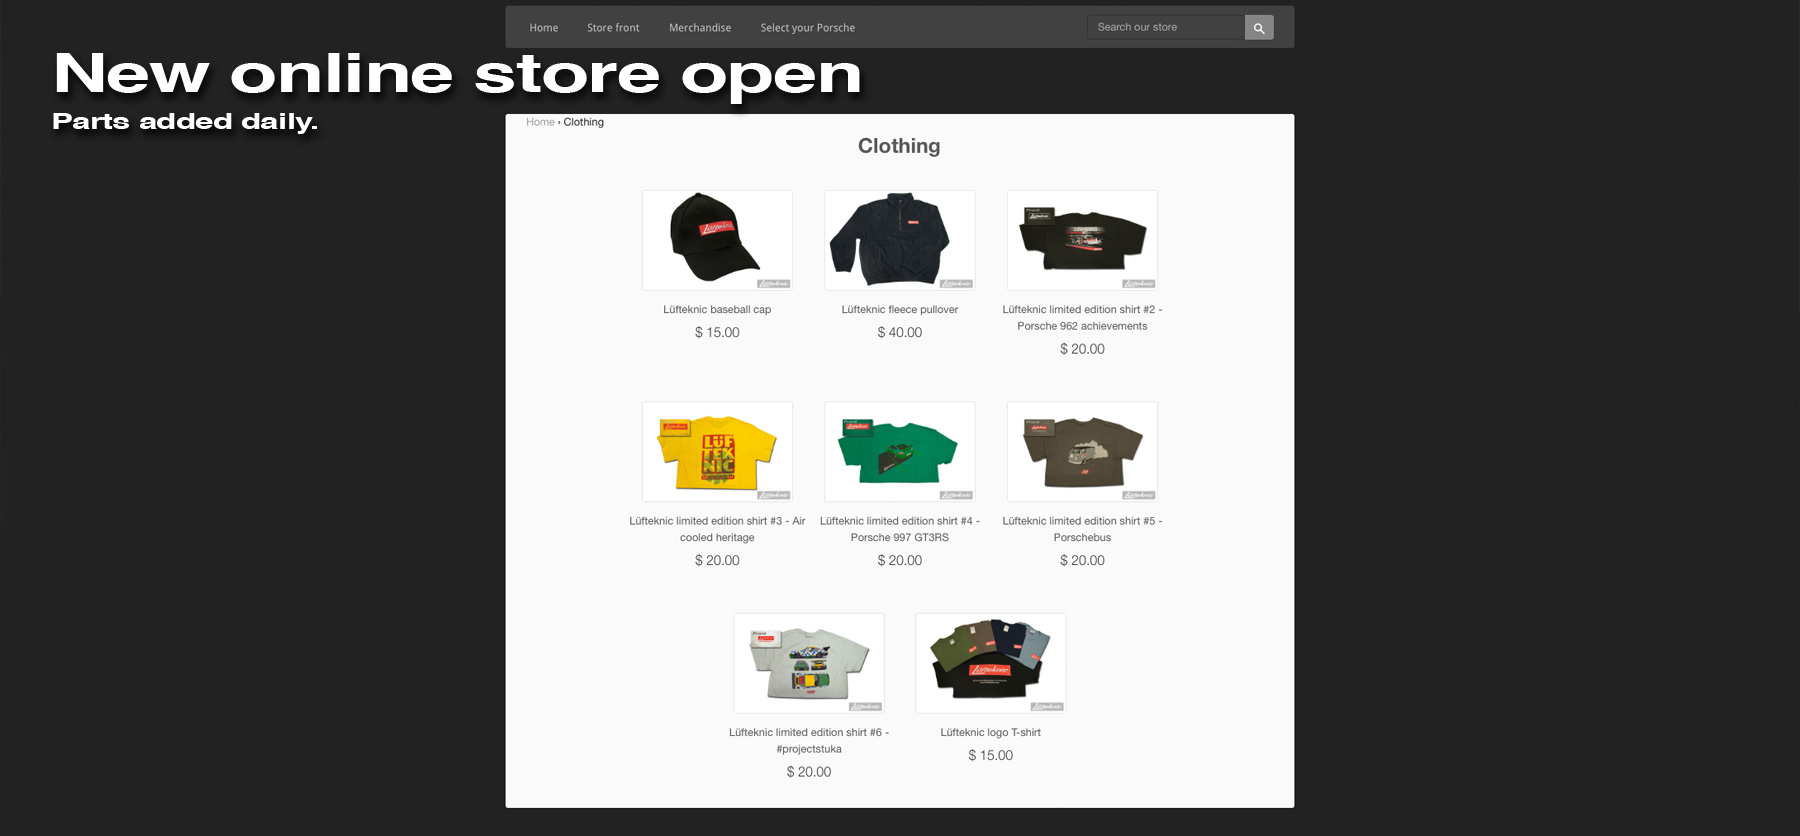 A screen capture showing the merch section of the new lufteknic website